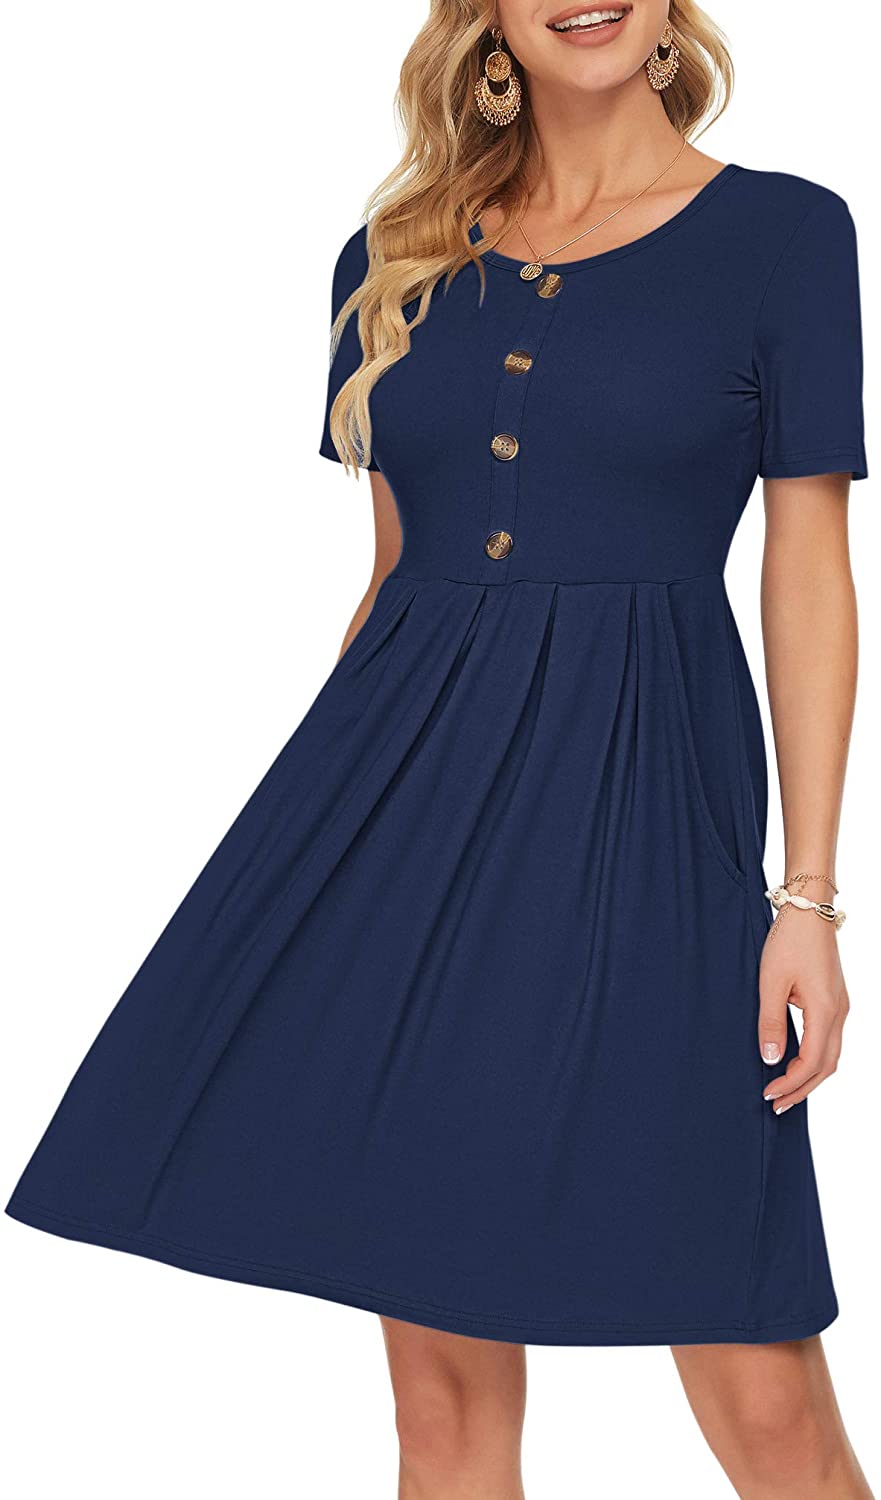 AUSELILY Women's Short Sleeve Pleated Loose Swing Casual Dress with Pockets  Knee | eBay